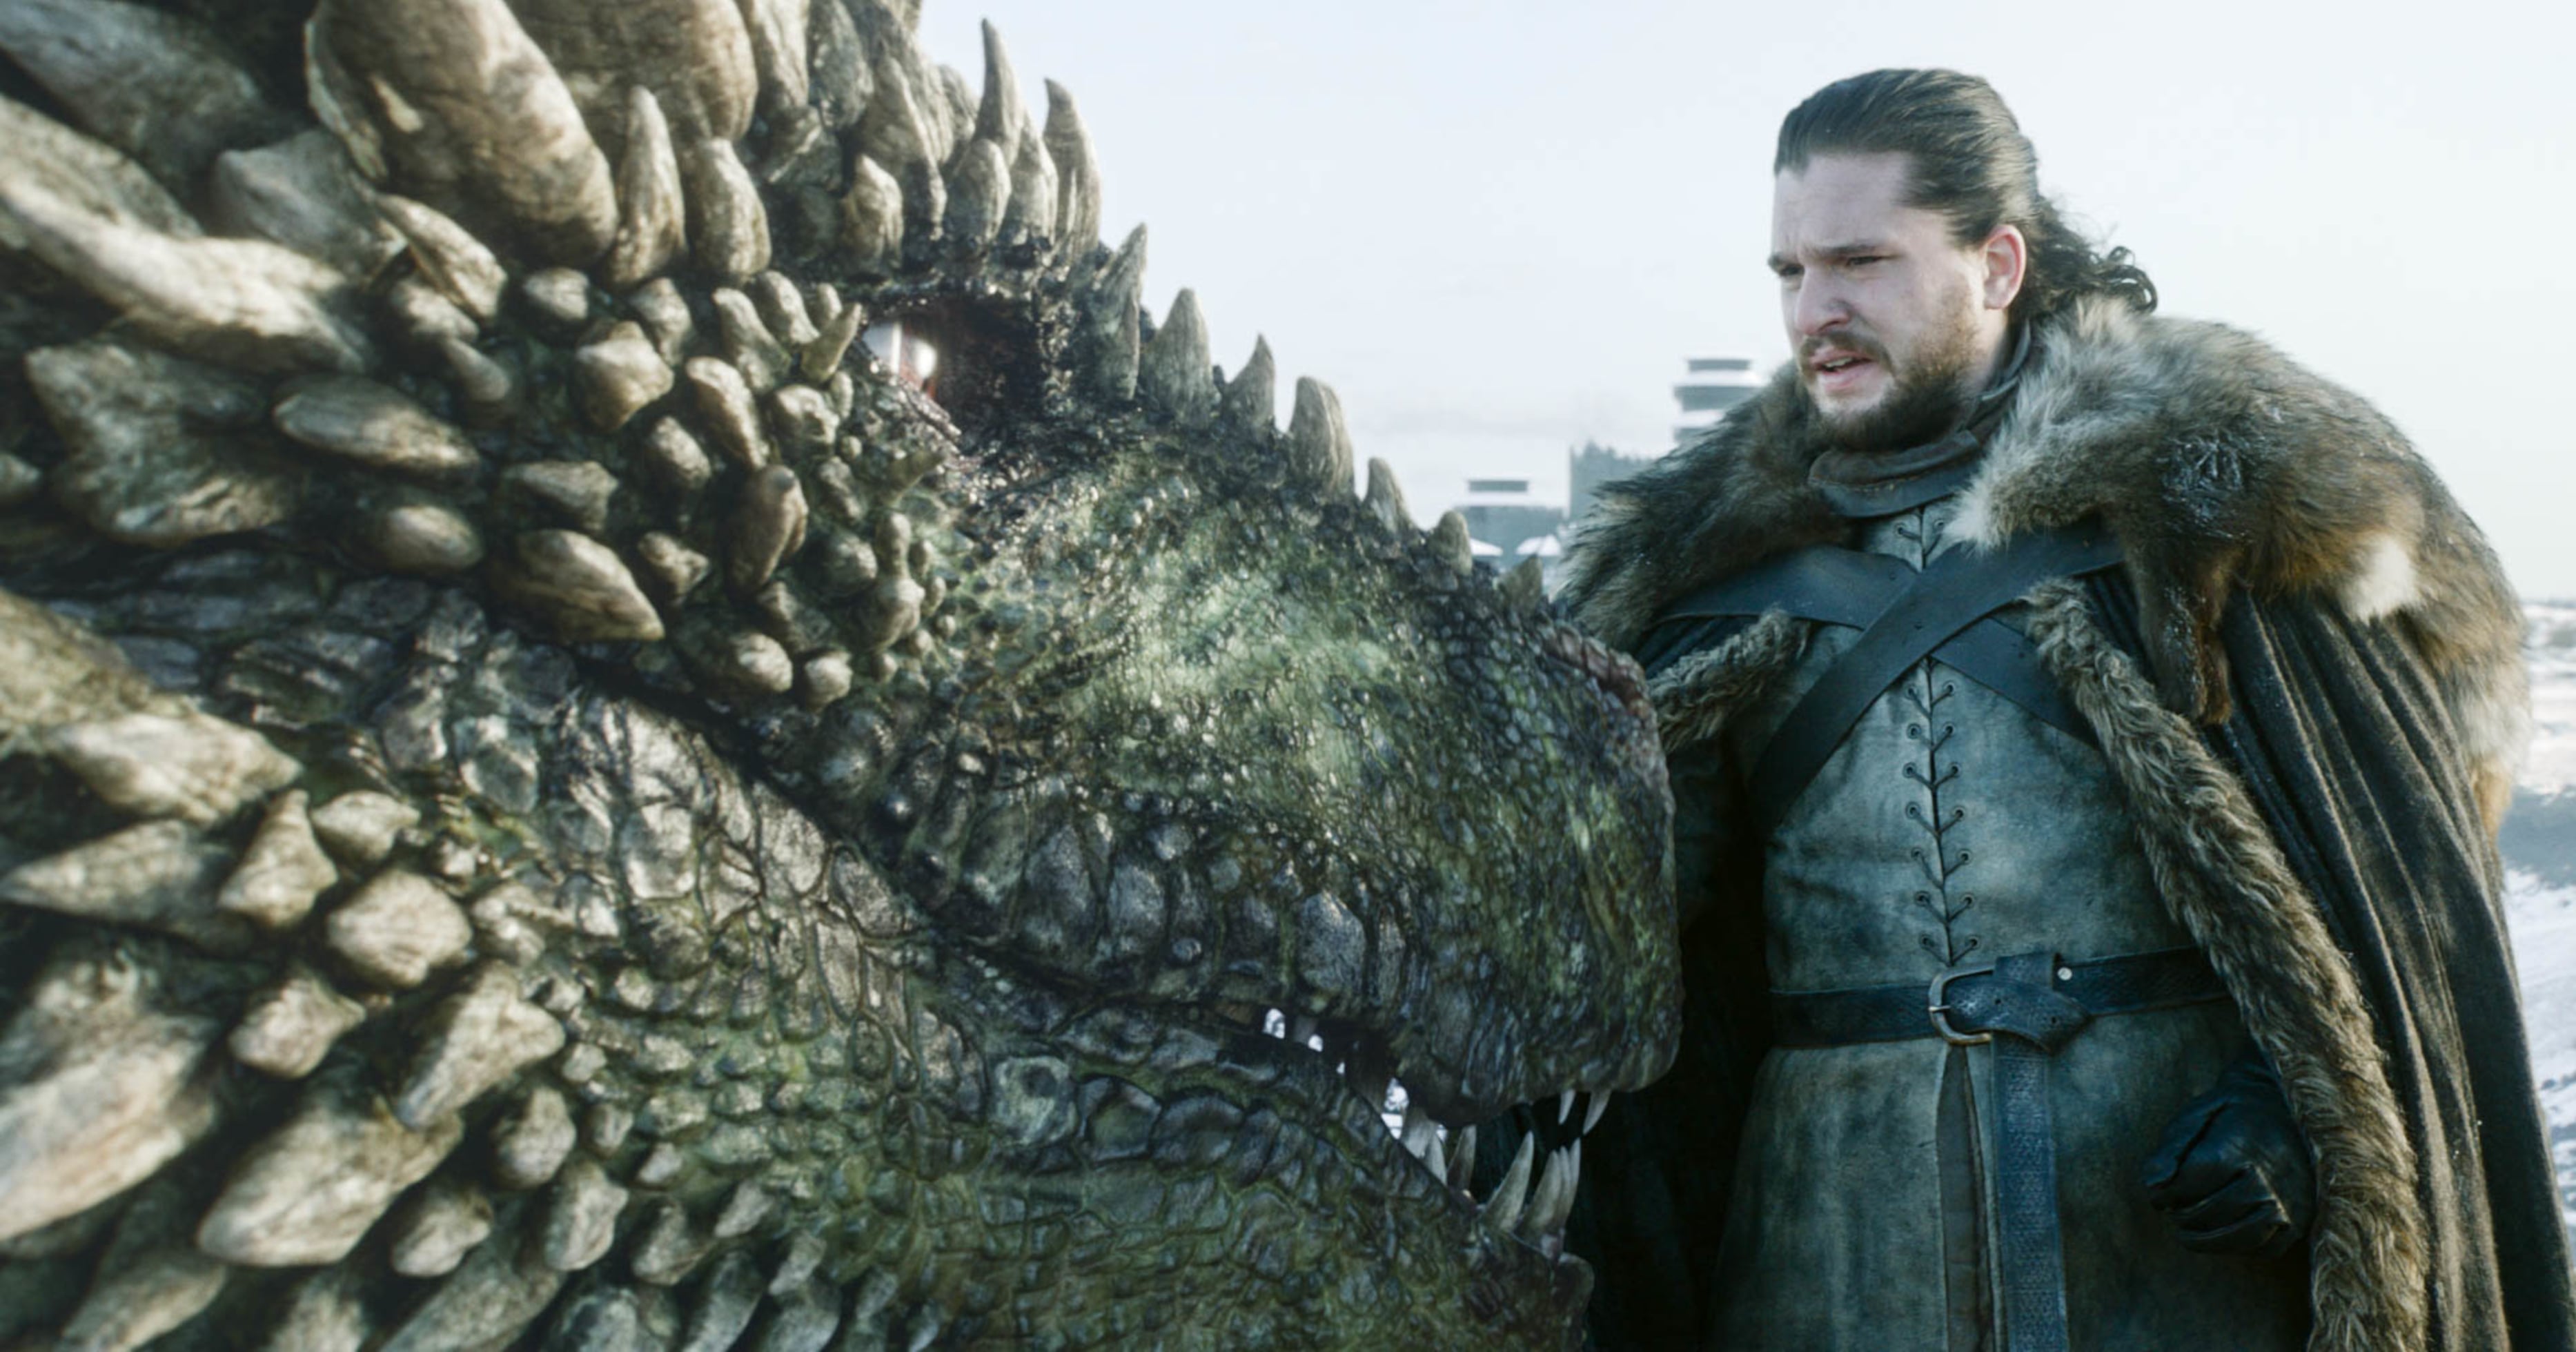 Game of Thrones': 9 Questions for the Final Season - The New York